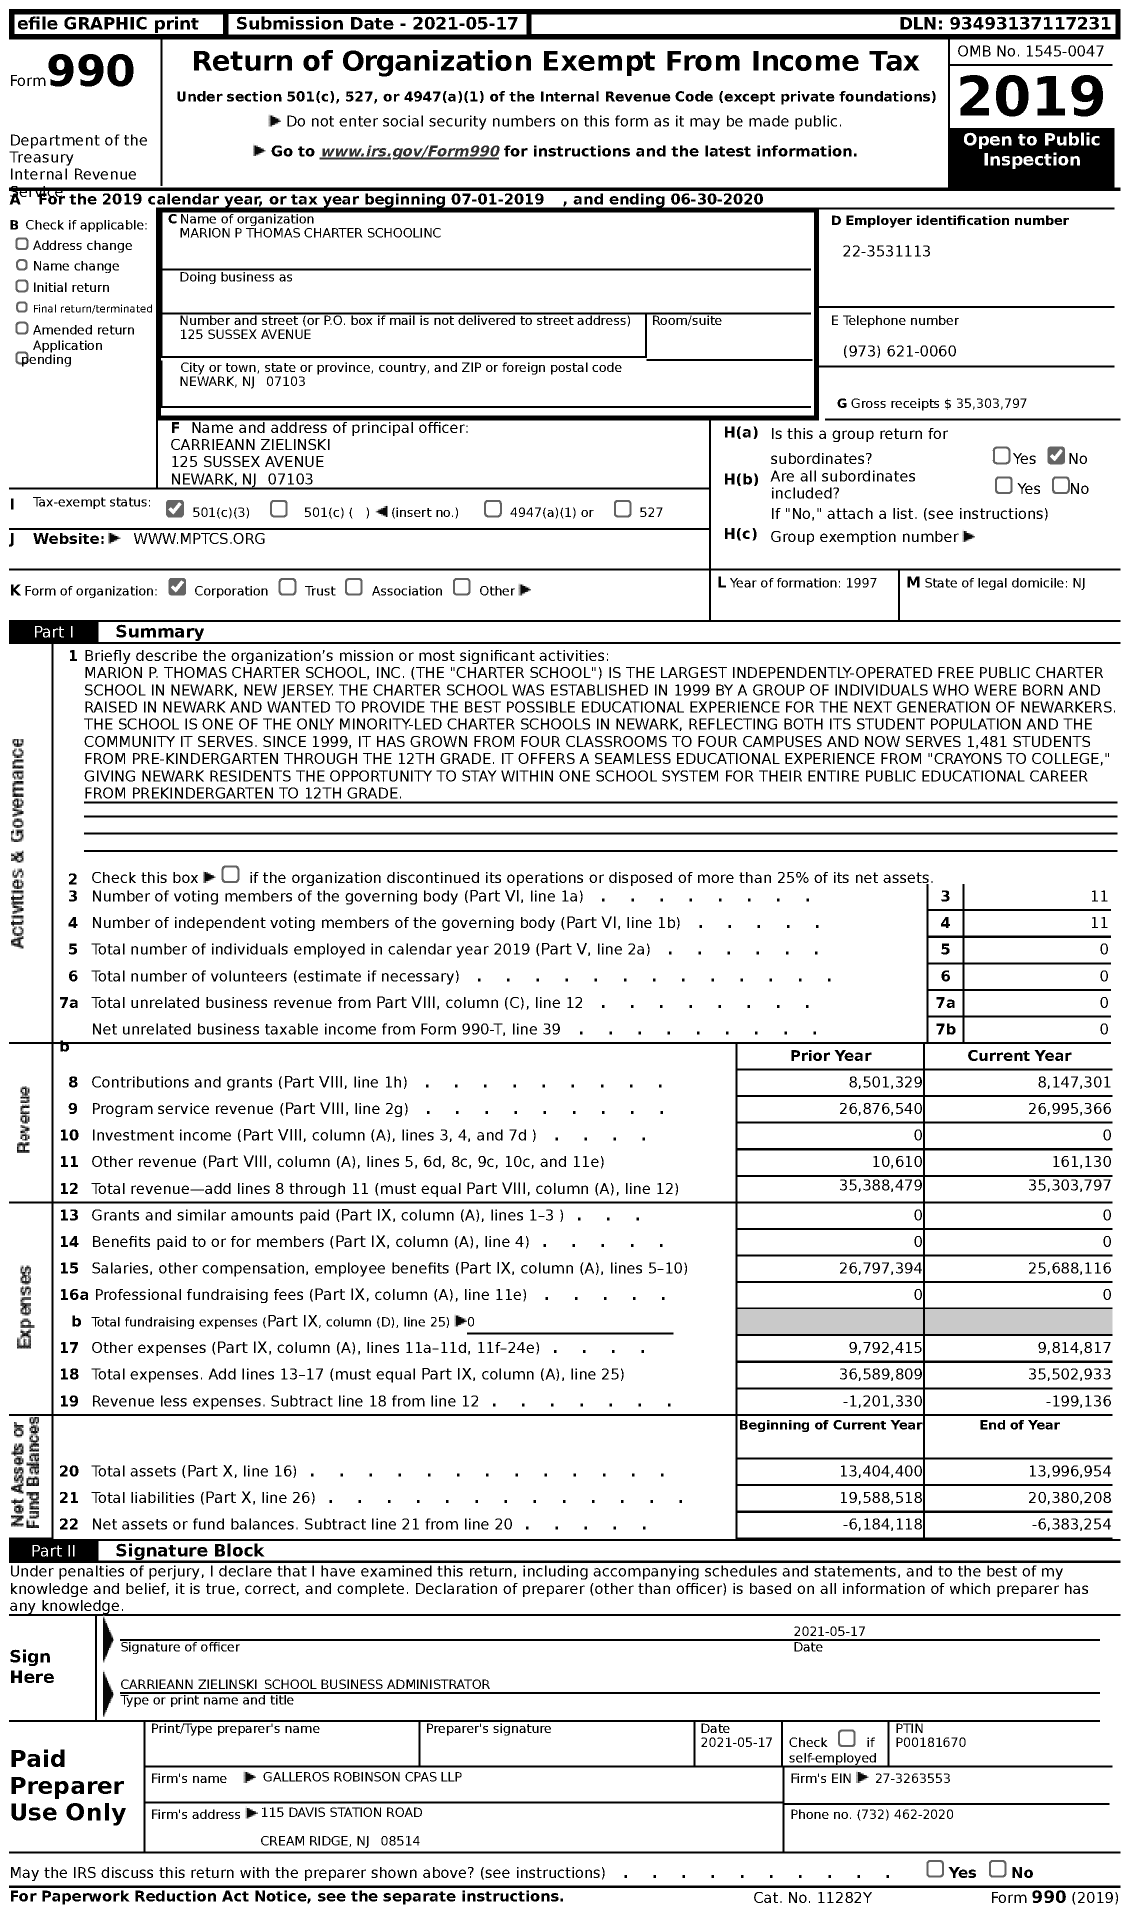 Image of first page of 2019 Form 990 for Marion P. Thomas Charter School (MPTCS)